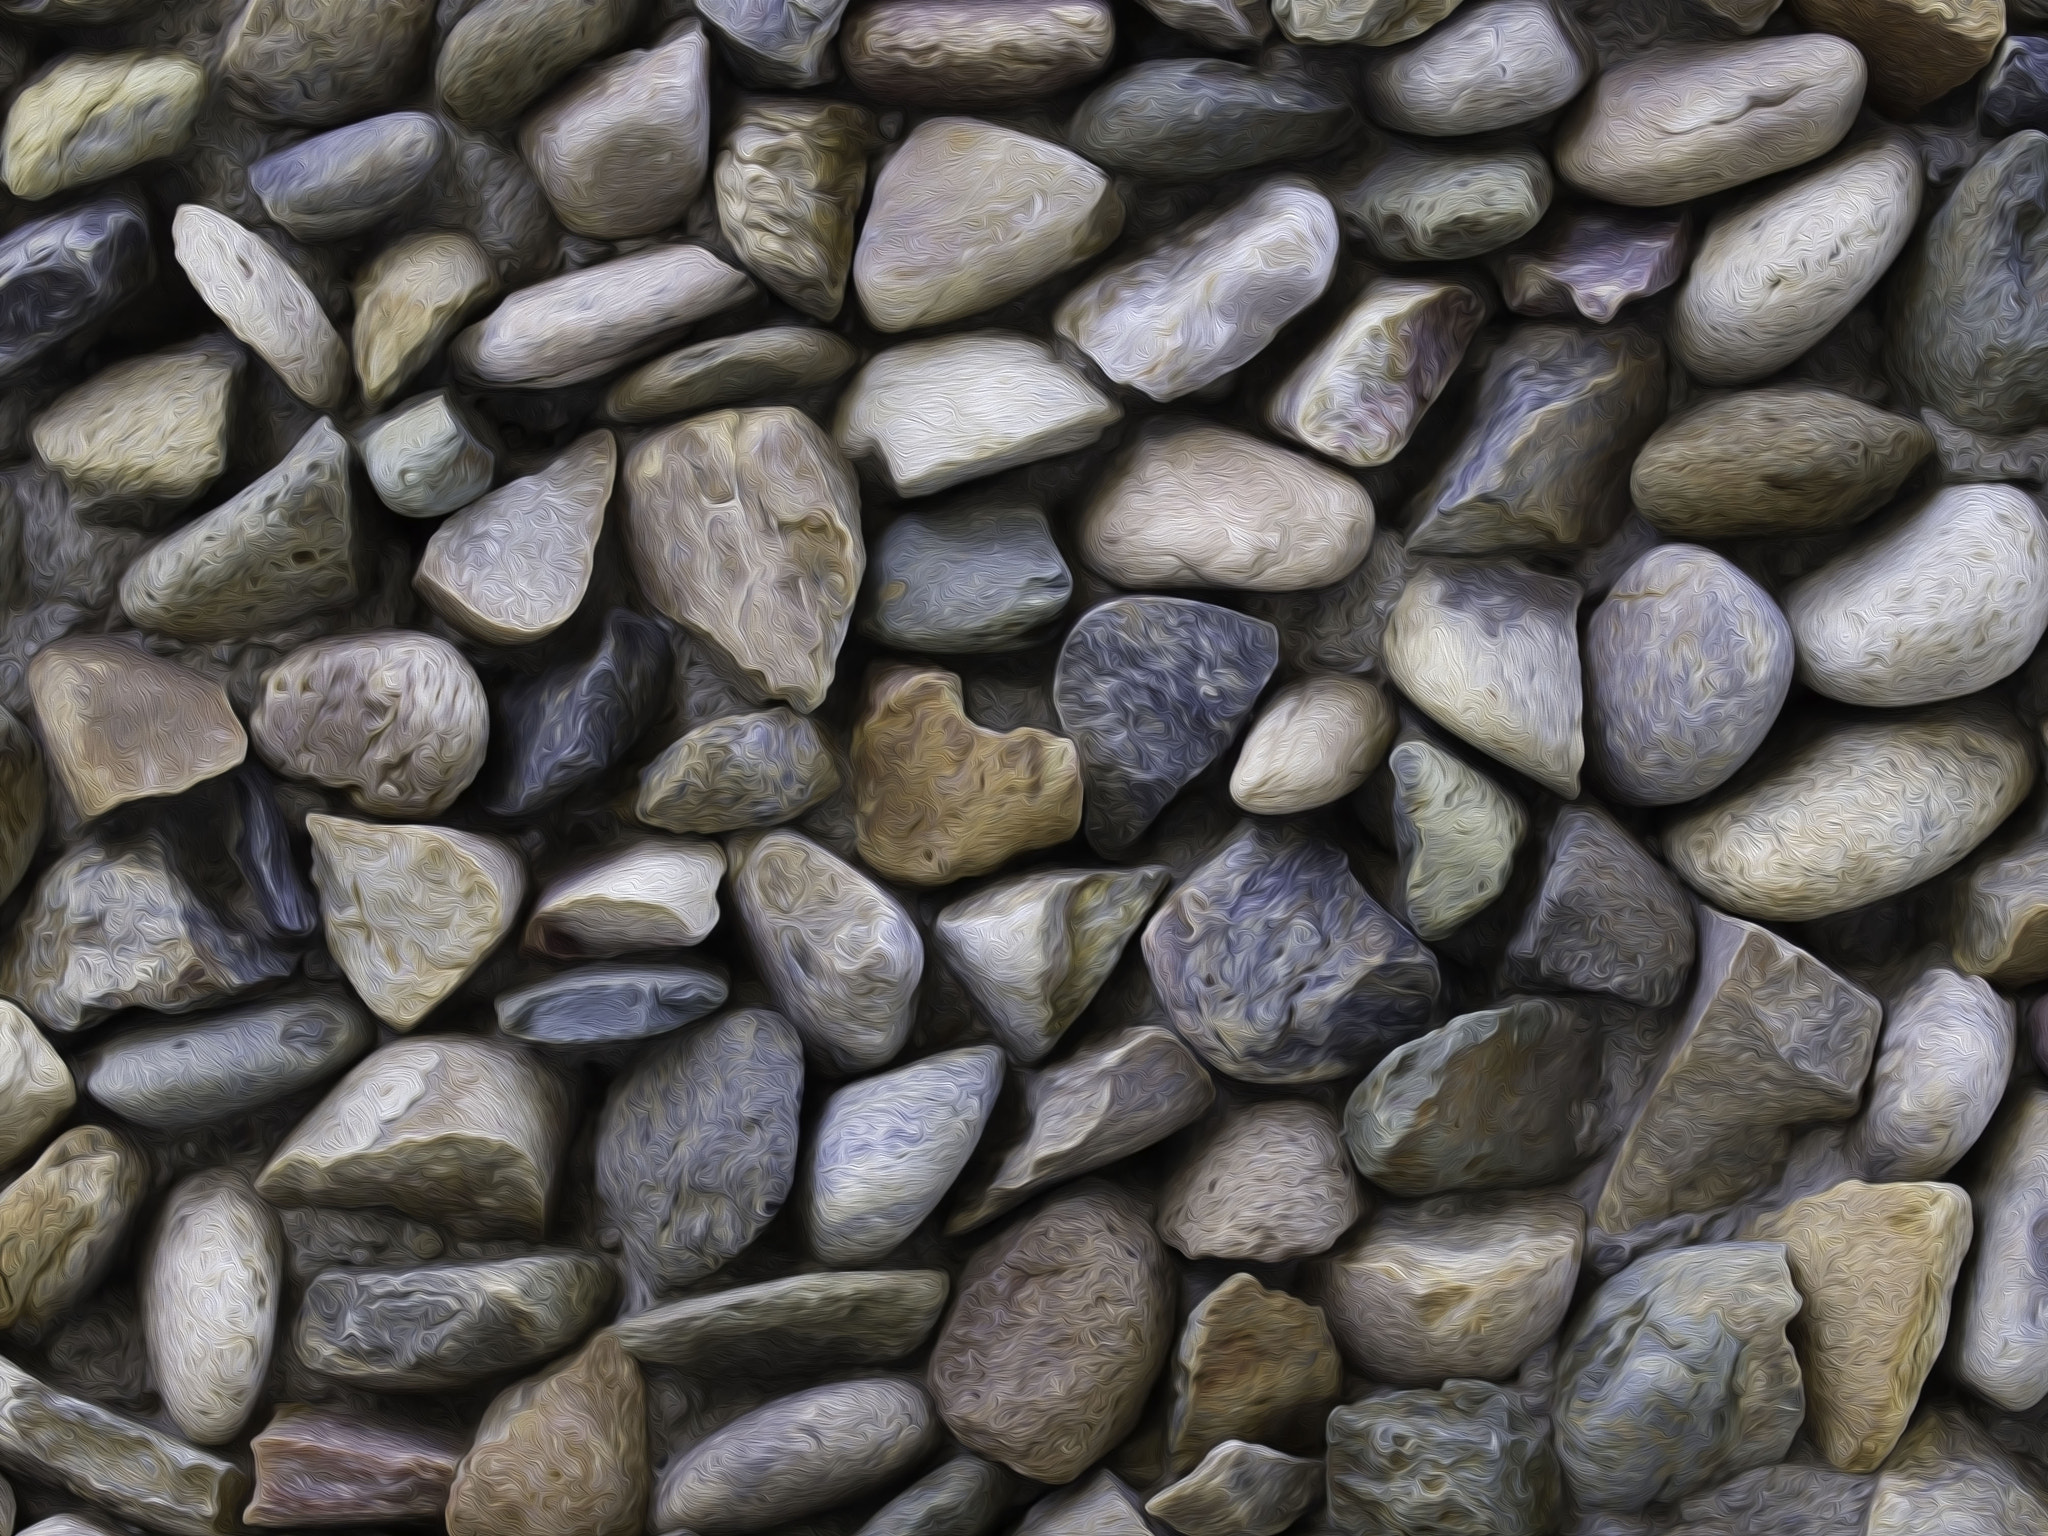 OLYMPUS 50mm Lens sample photo. Artistic stone wall photography